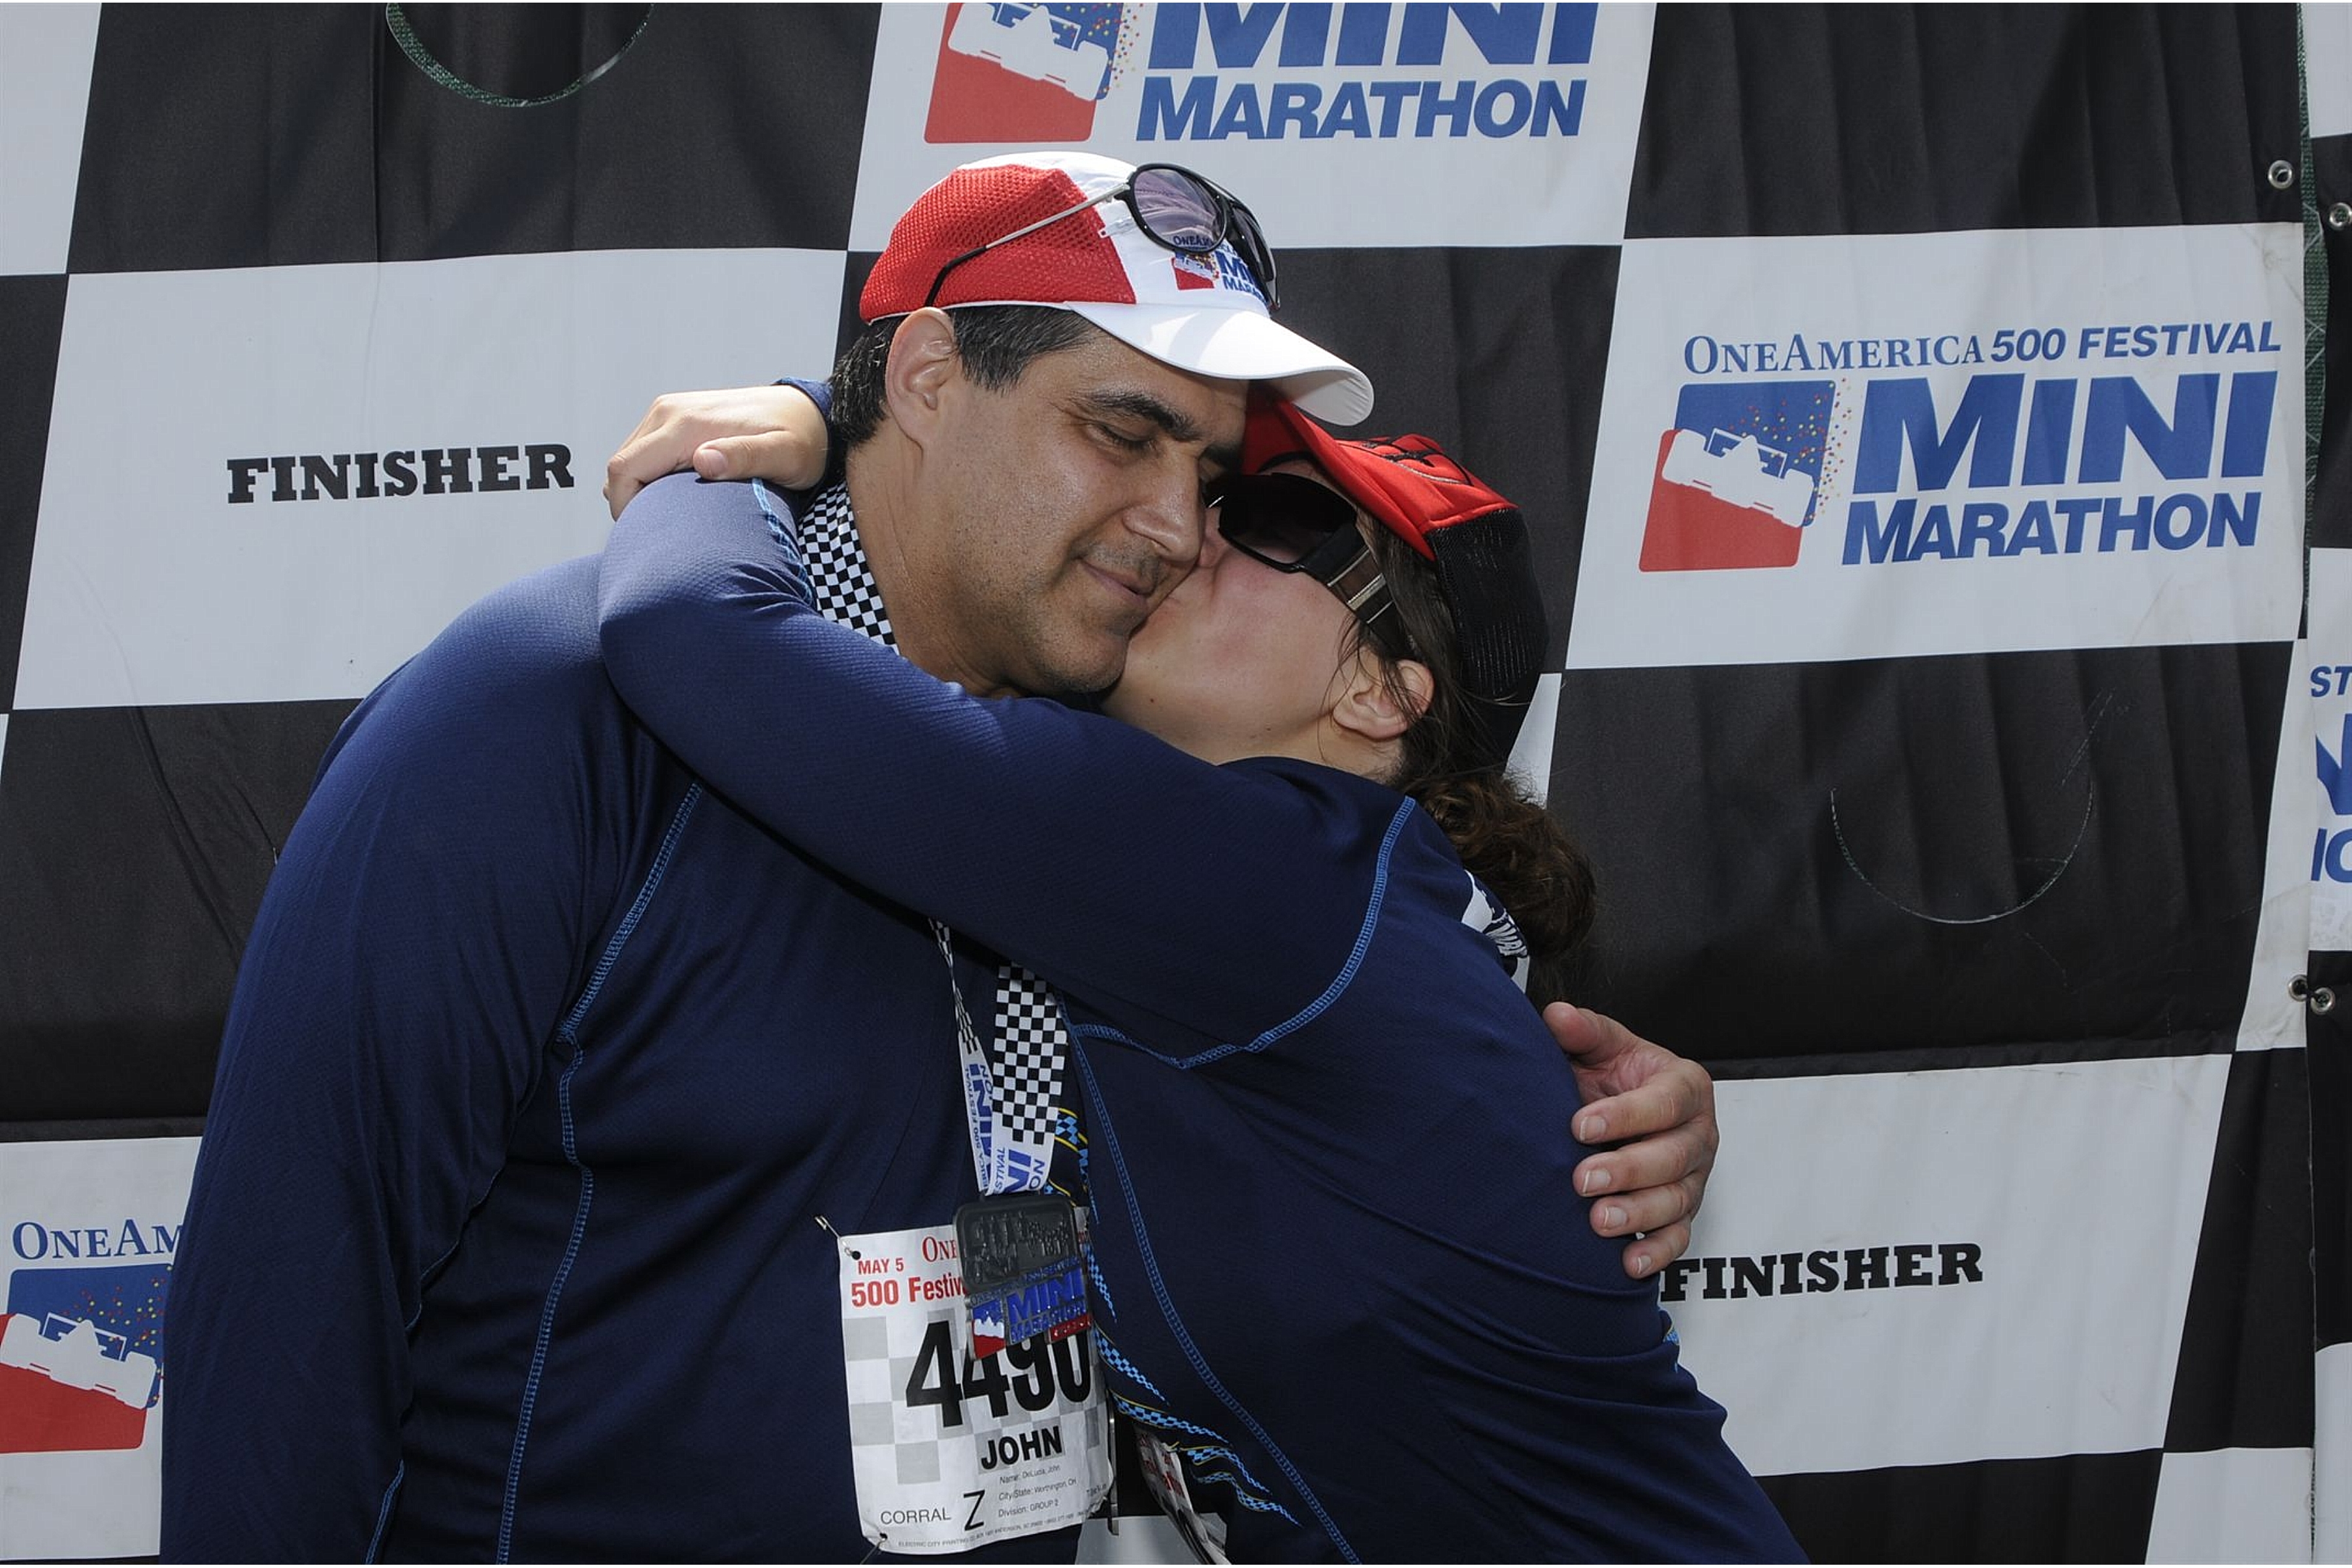 Aurora De Lucia kissing her dad on the cheek after his first half marathon at the Indianapolis 500 Festival